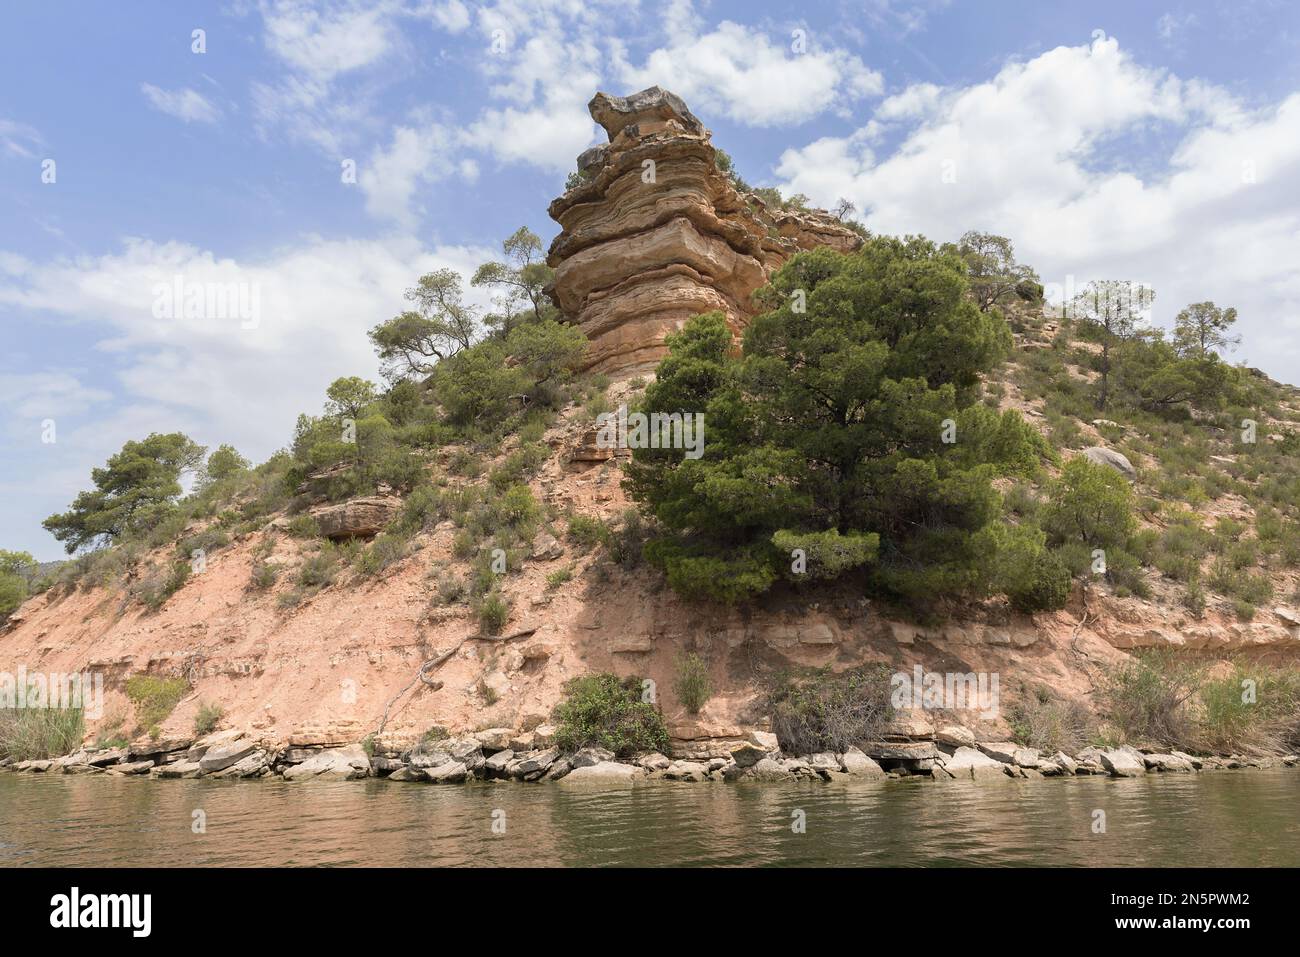 Rock formation on the banks of the Ribarroja Reservoir, Catalonia, Spain Stock Photo